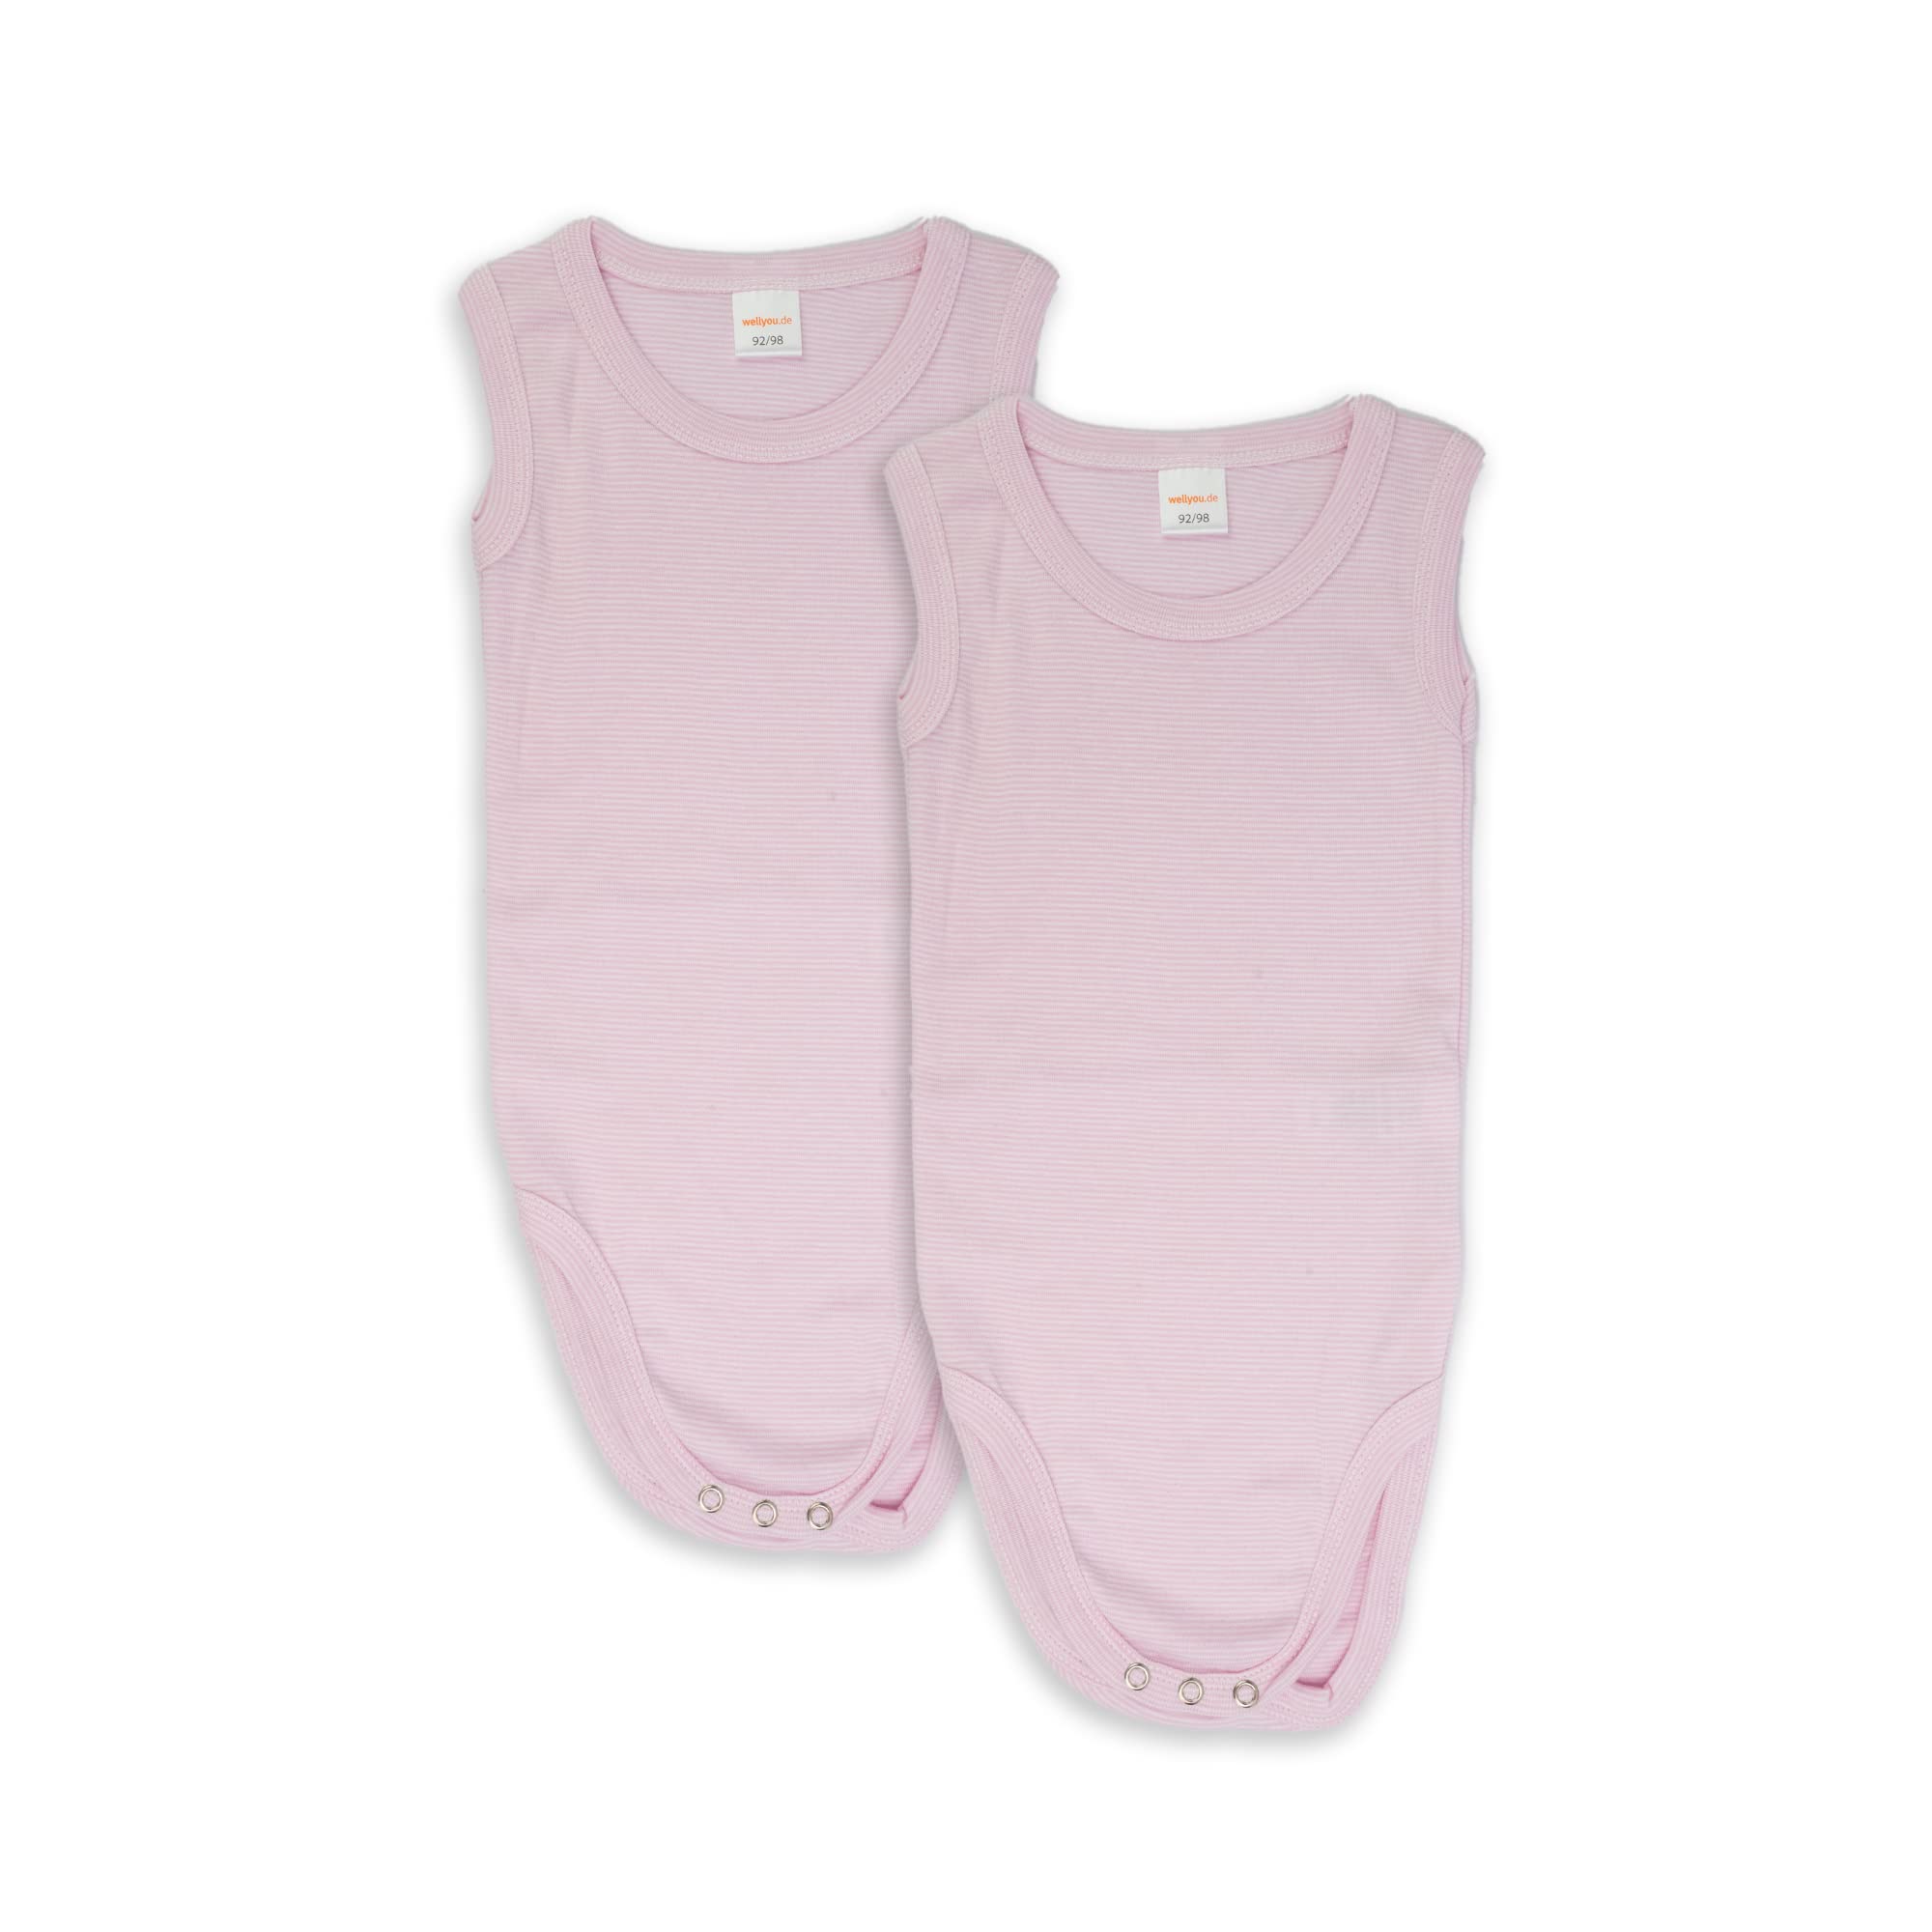 WELLYOU Doppelpack Baby Body - Kinder Body ohne Arm rosa-Weiss gestreift , Rosa, 116-122